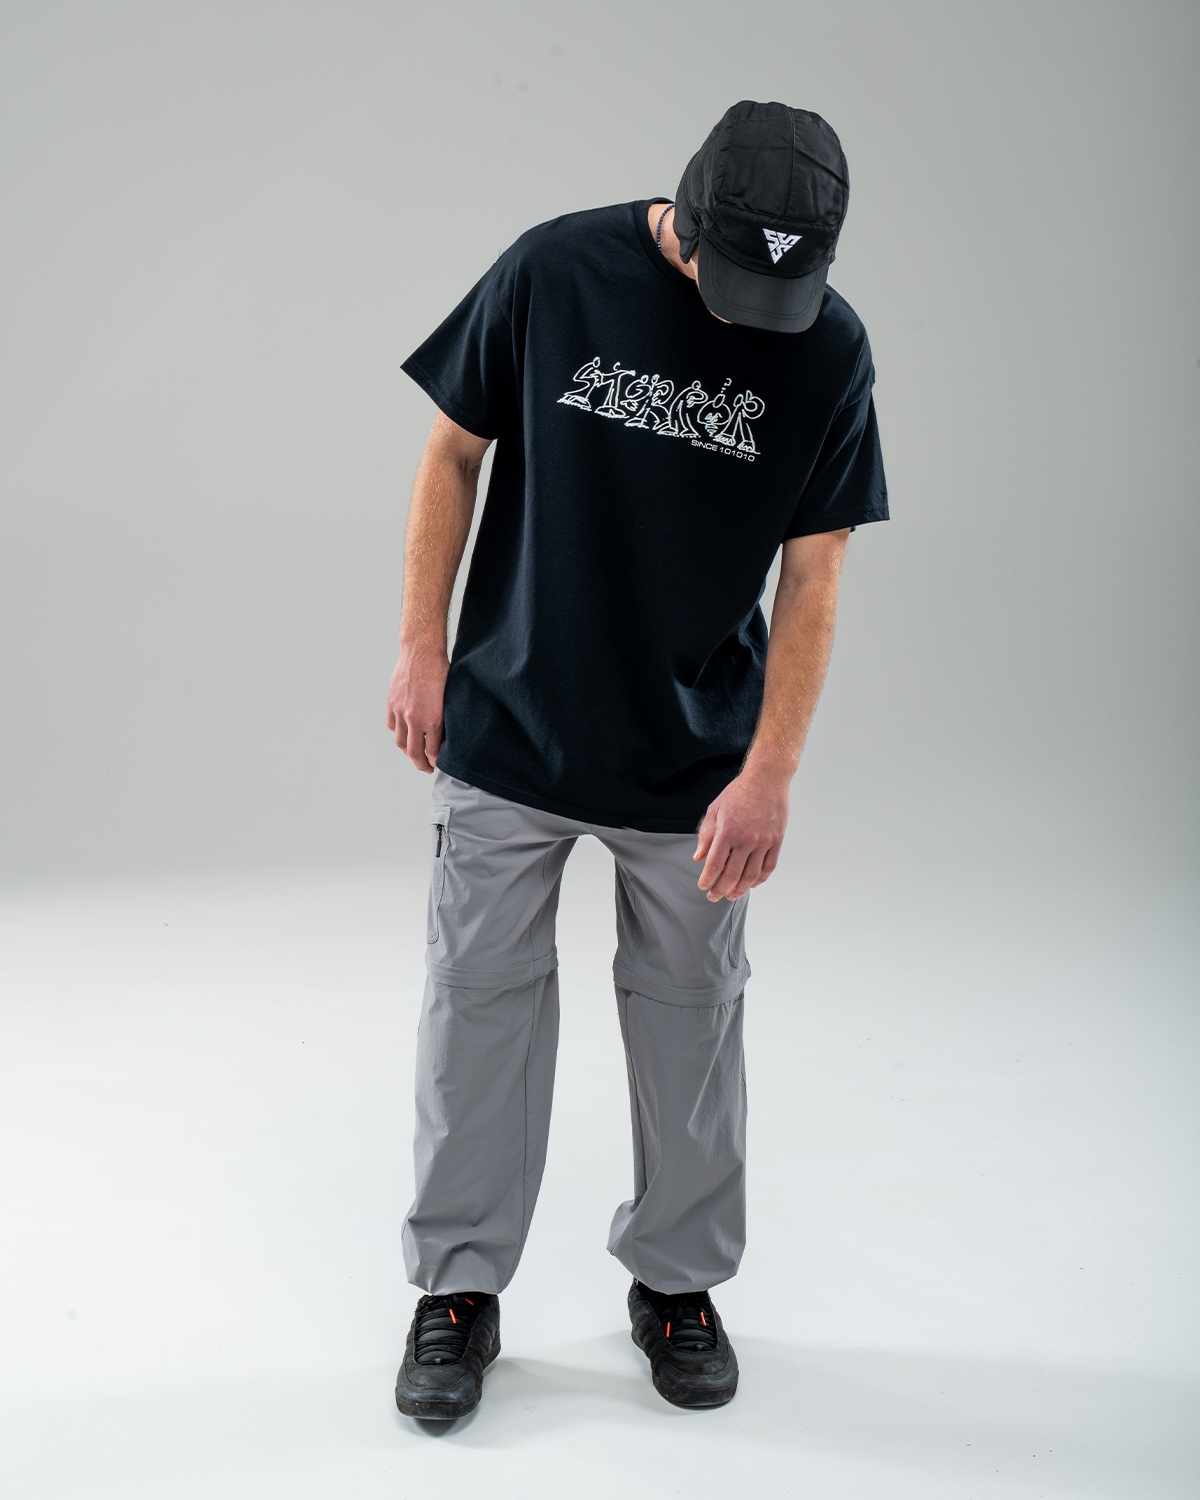 SQUAD T-SHIRT | STORROR | parkour clothing & technical sportswear